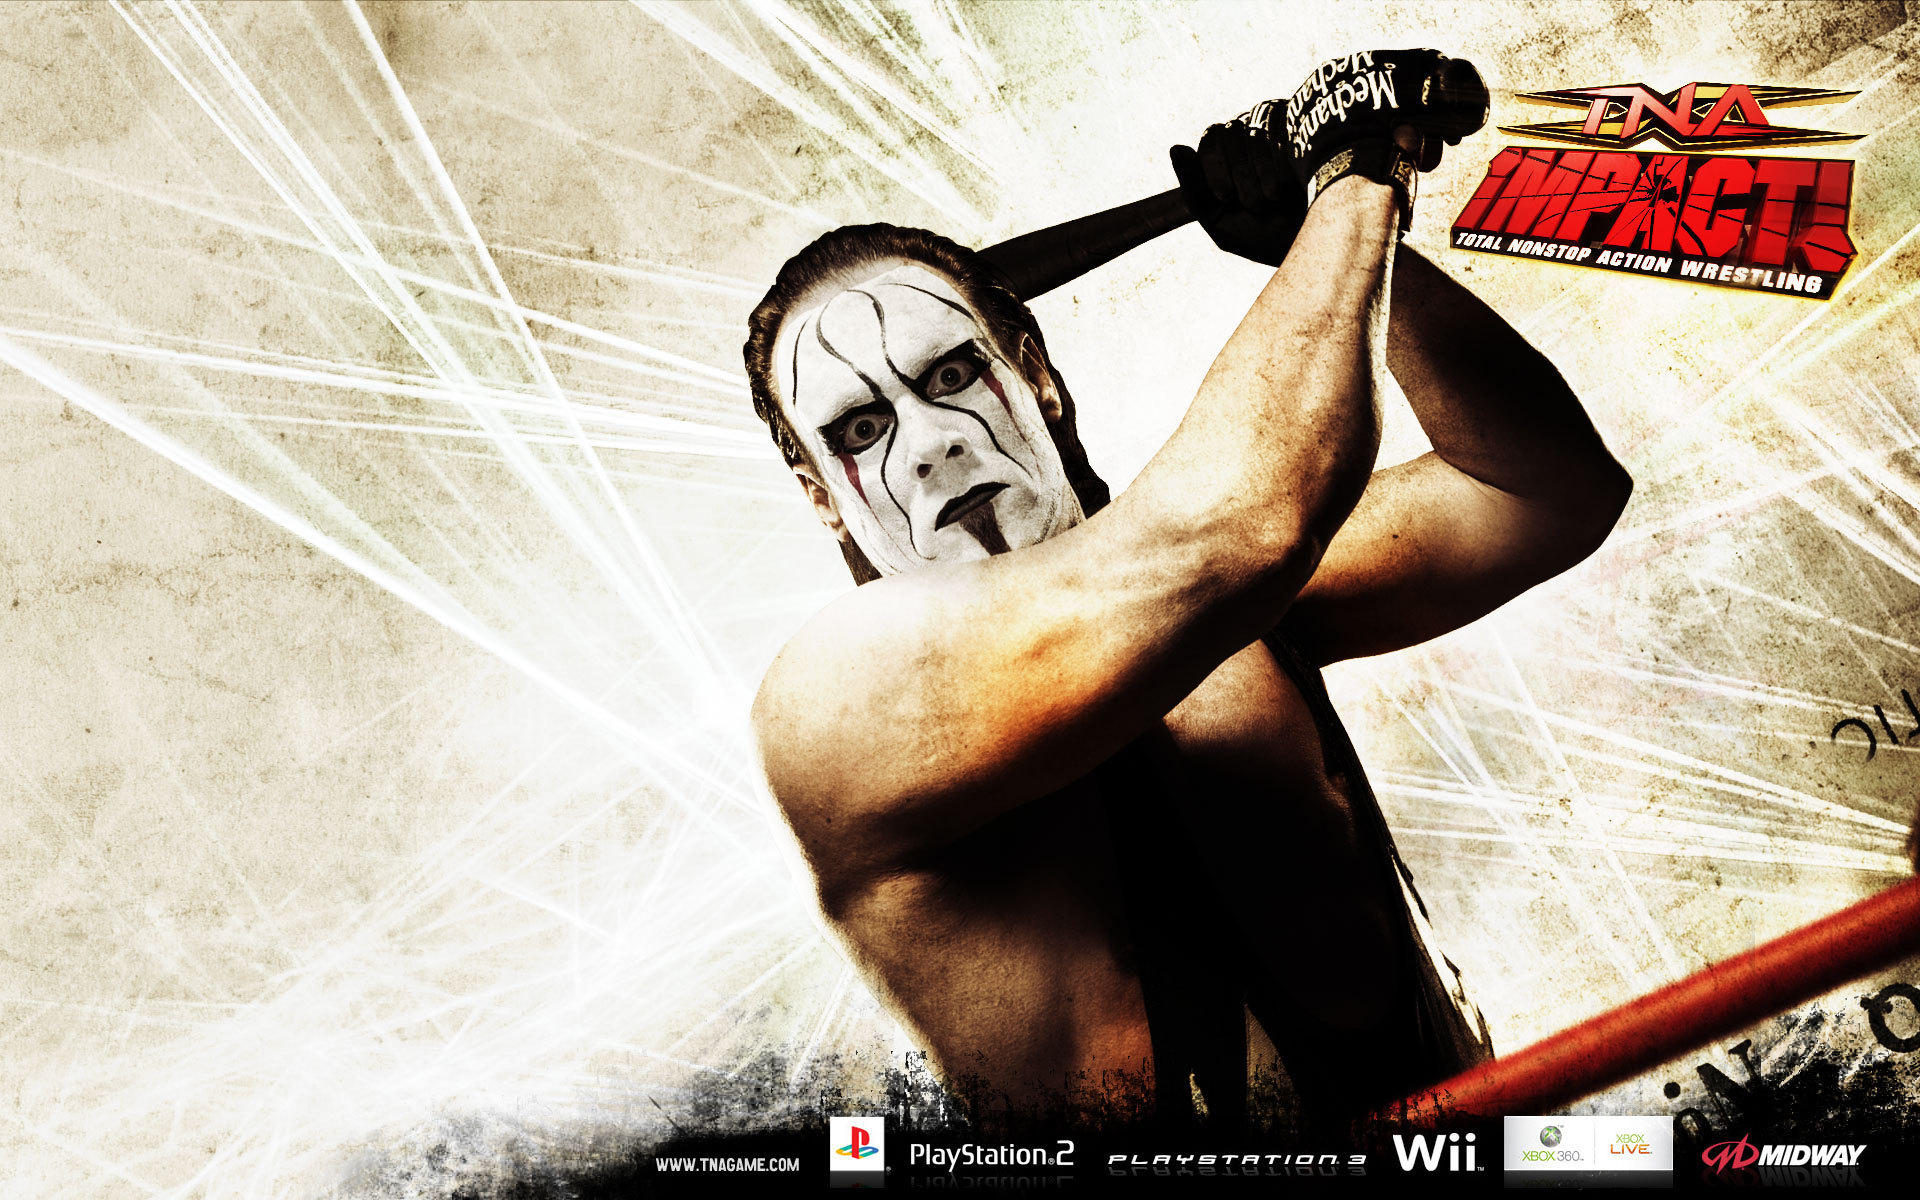 Sting Wcw Image Tna Impact HD Wallpaper And